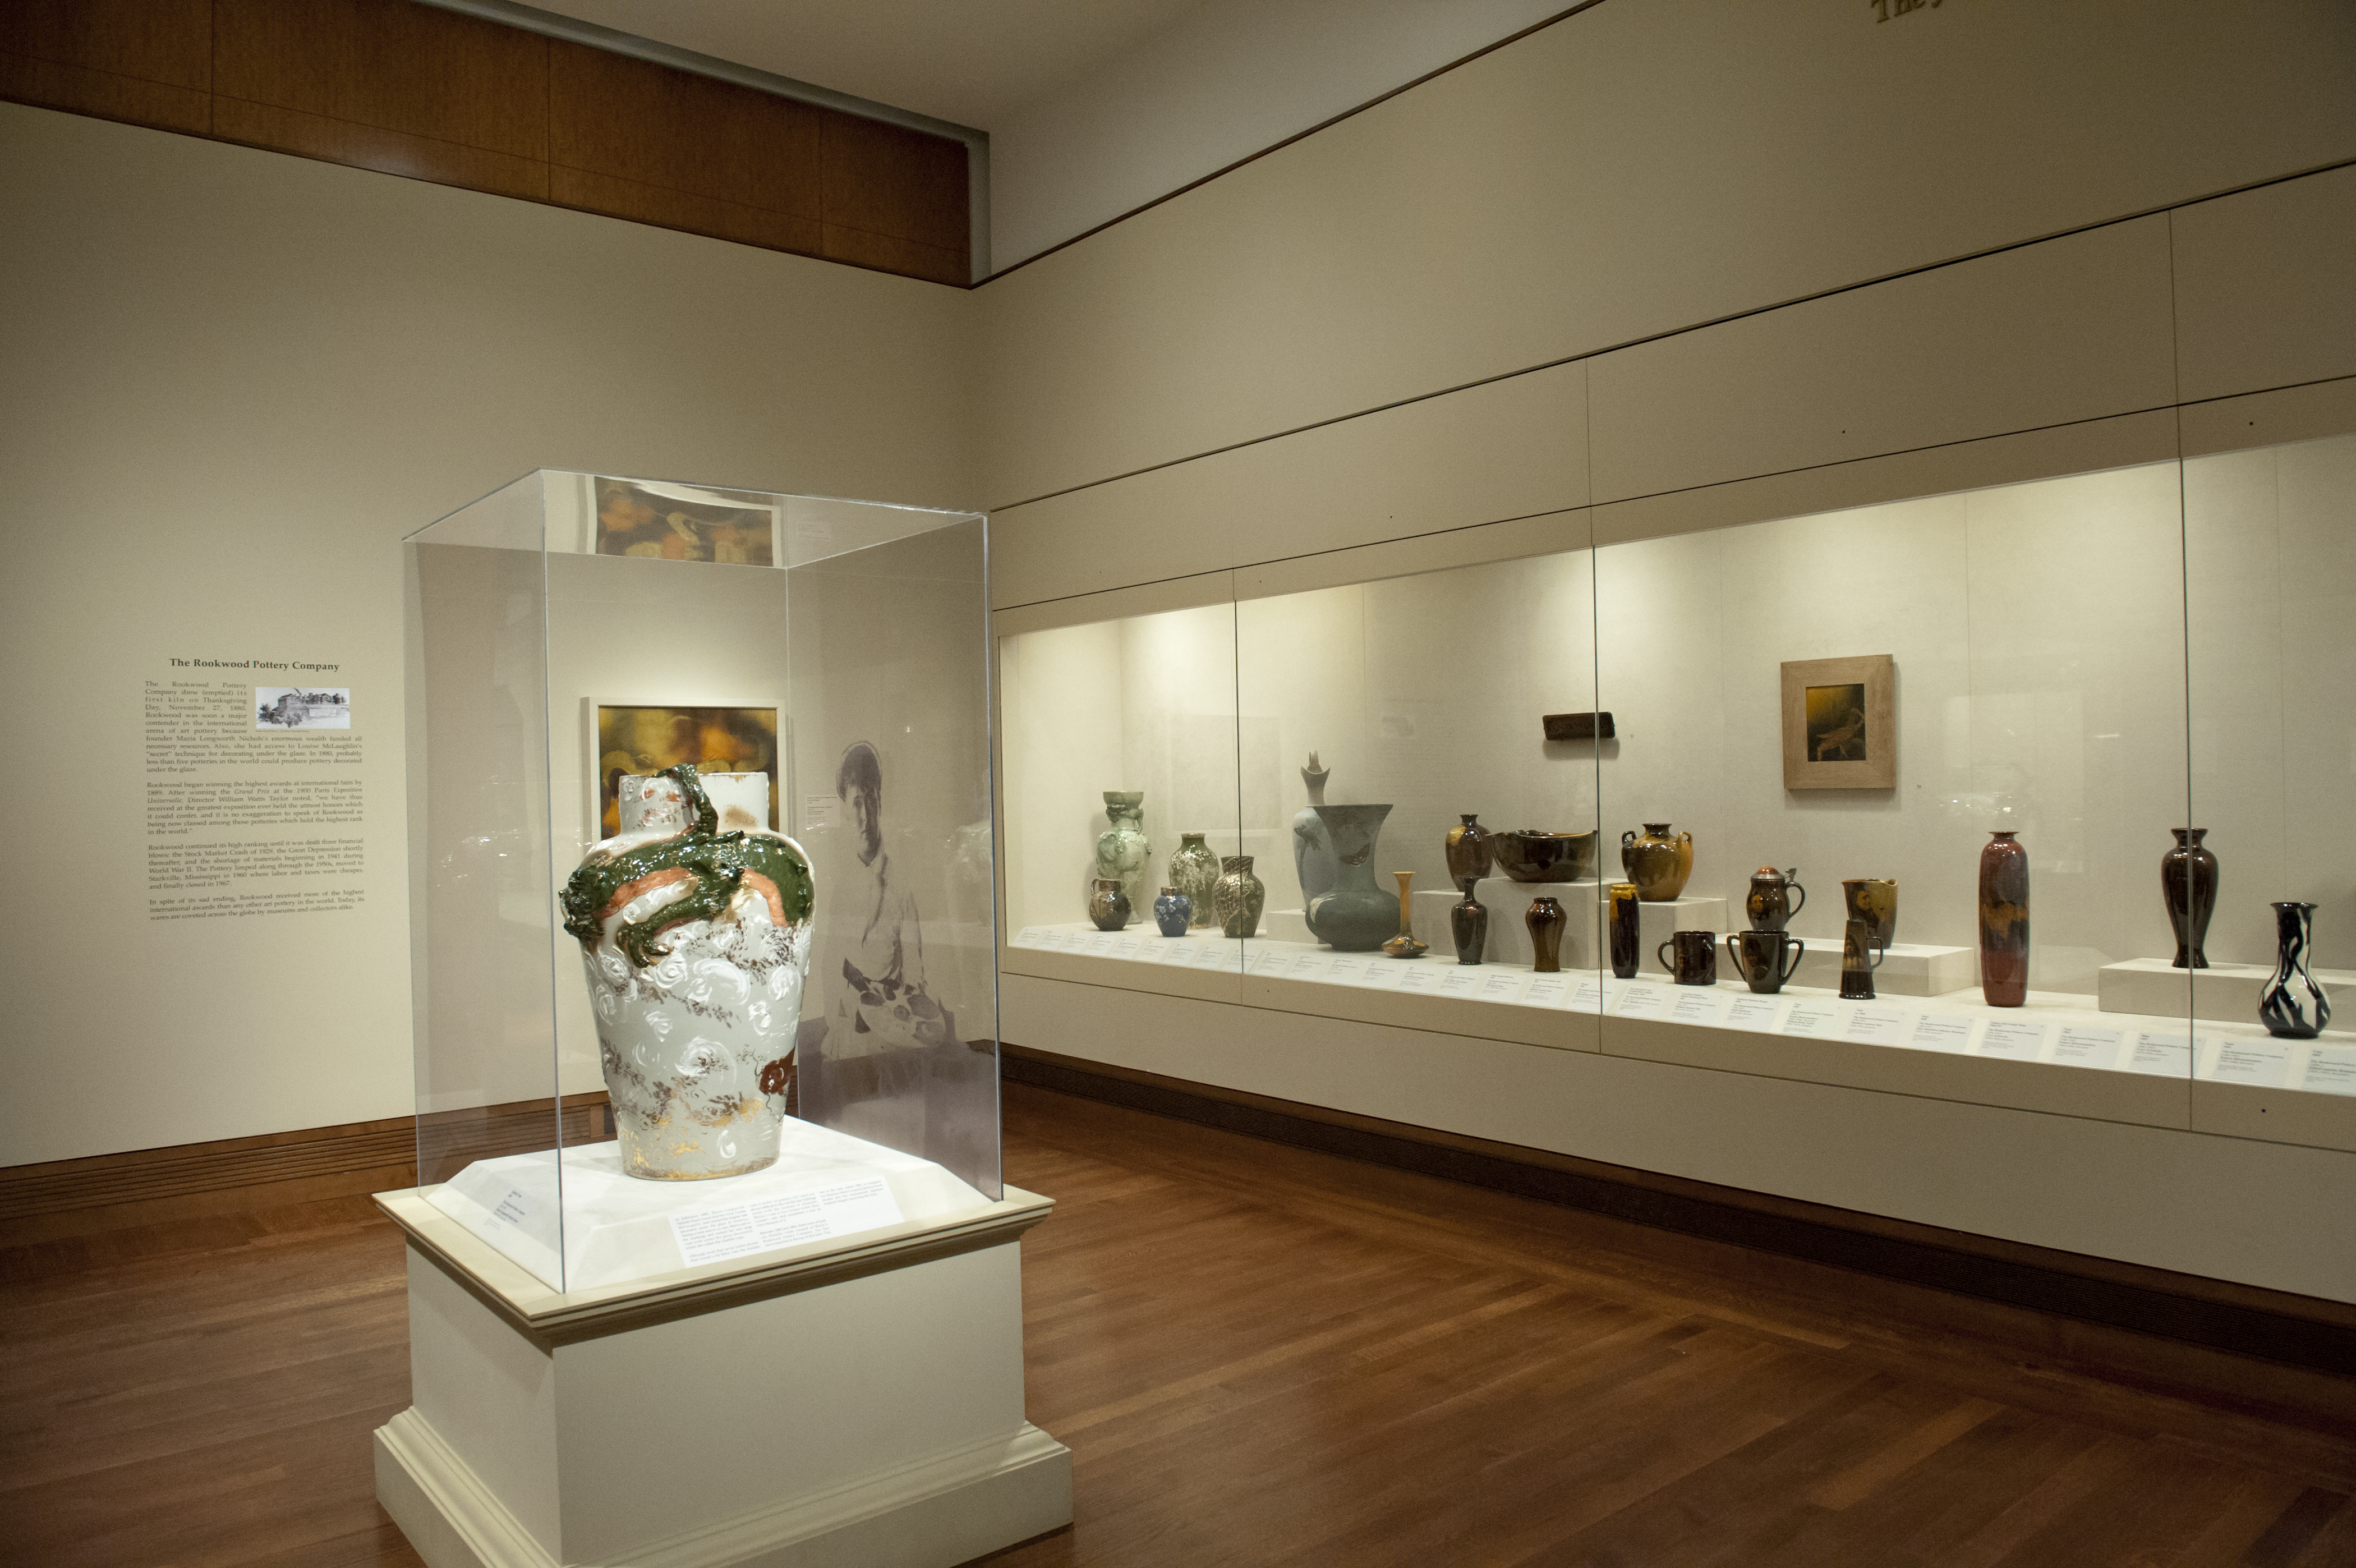 Public Tour: Highlights of the Collection